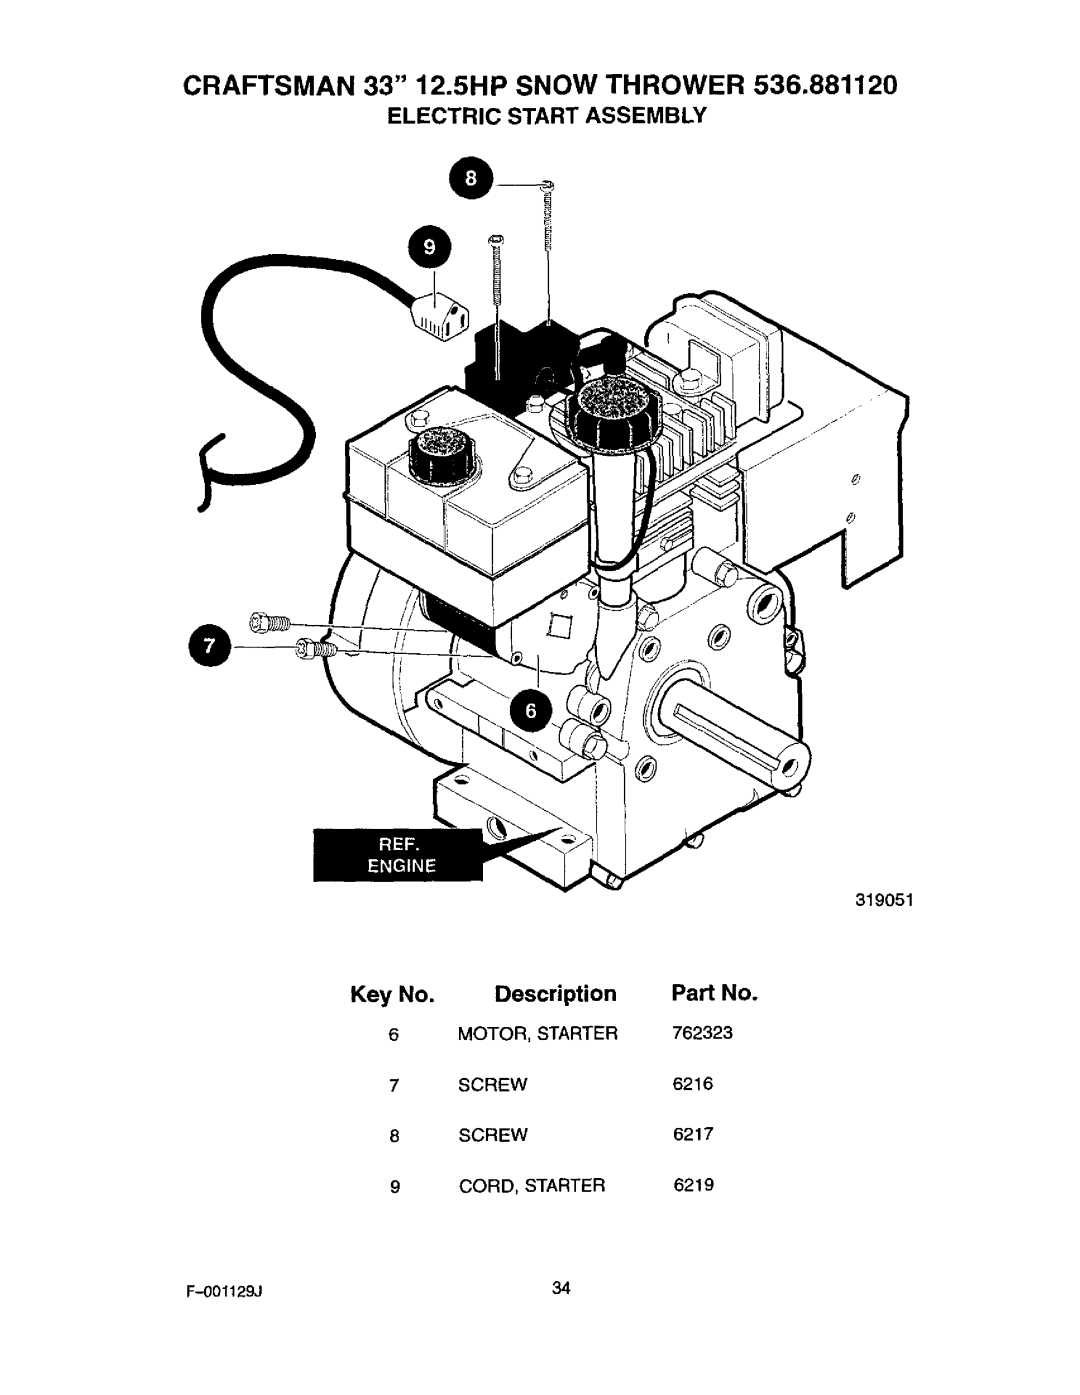 Craftsman 536.88112 operating instructions Craftsman 33 12.5HP Snow Thrower, Electric Start Assembly 